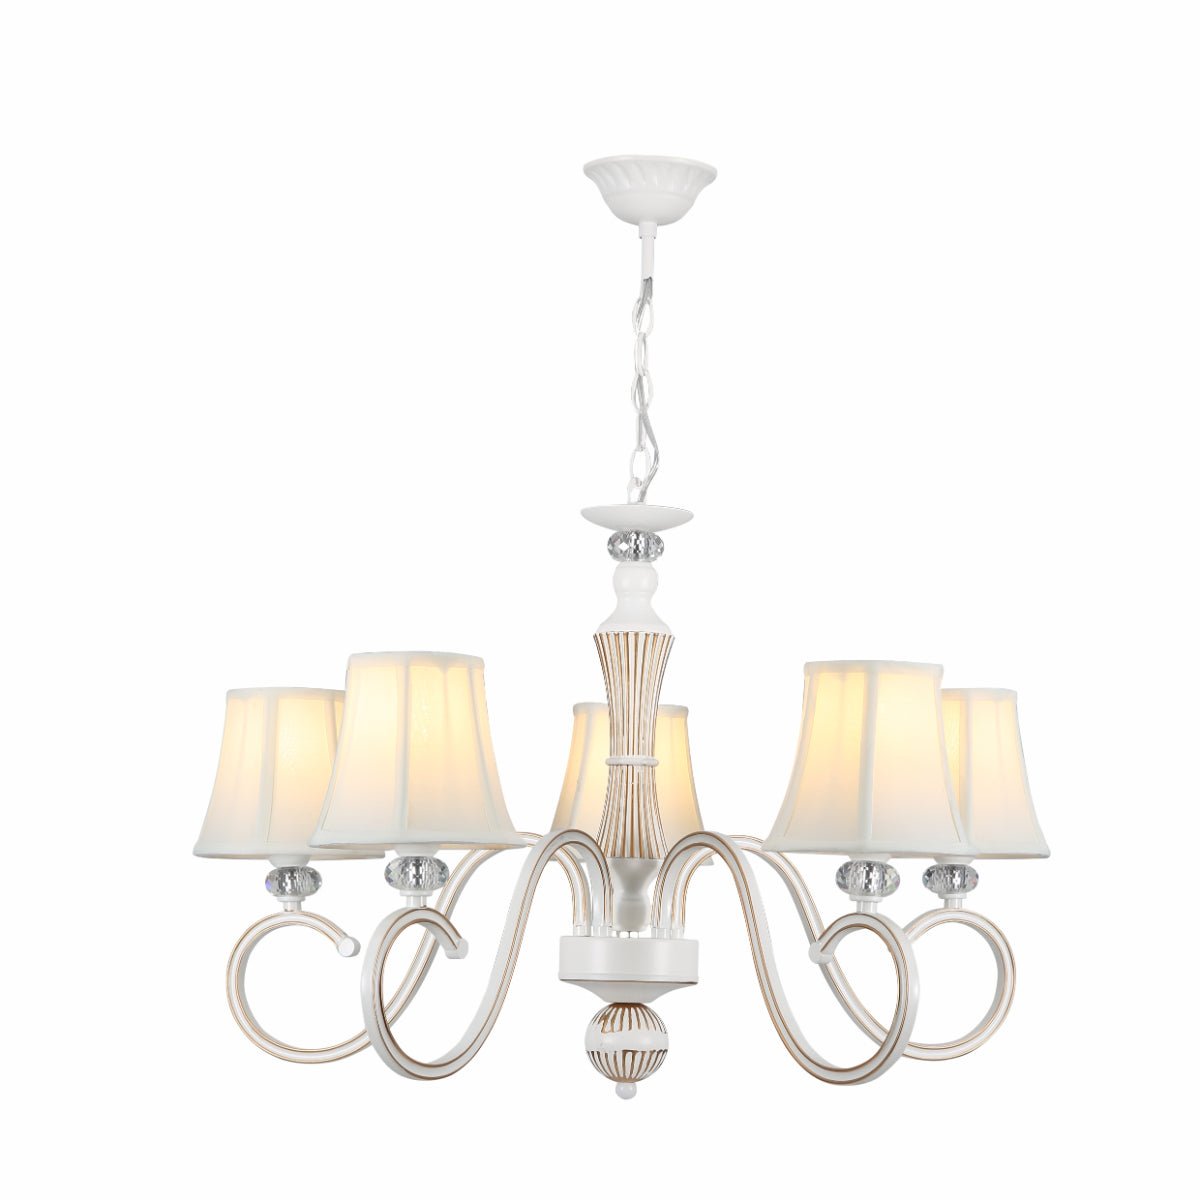 Main image of Off White Fabric Shaded Gold Aged Ivory Traditional Retro Vintage Classic Chandelier Ceiling Light with 5xE14 Fitting | TEKLED 159-17836